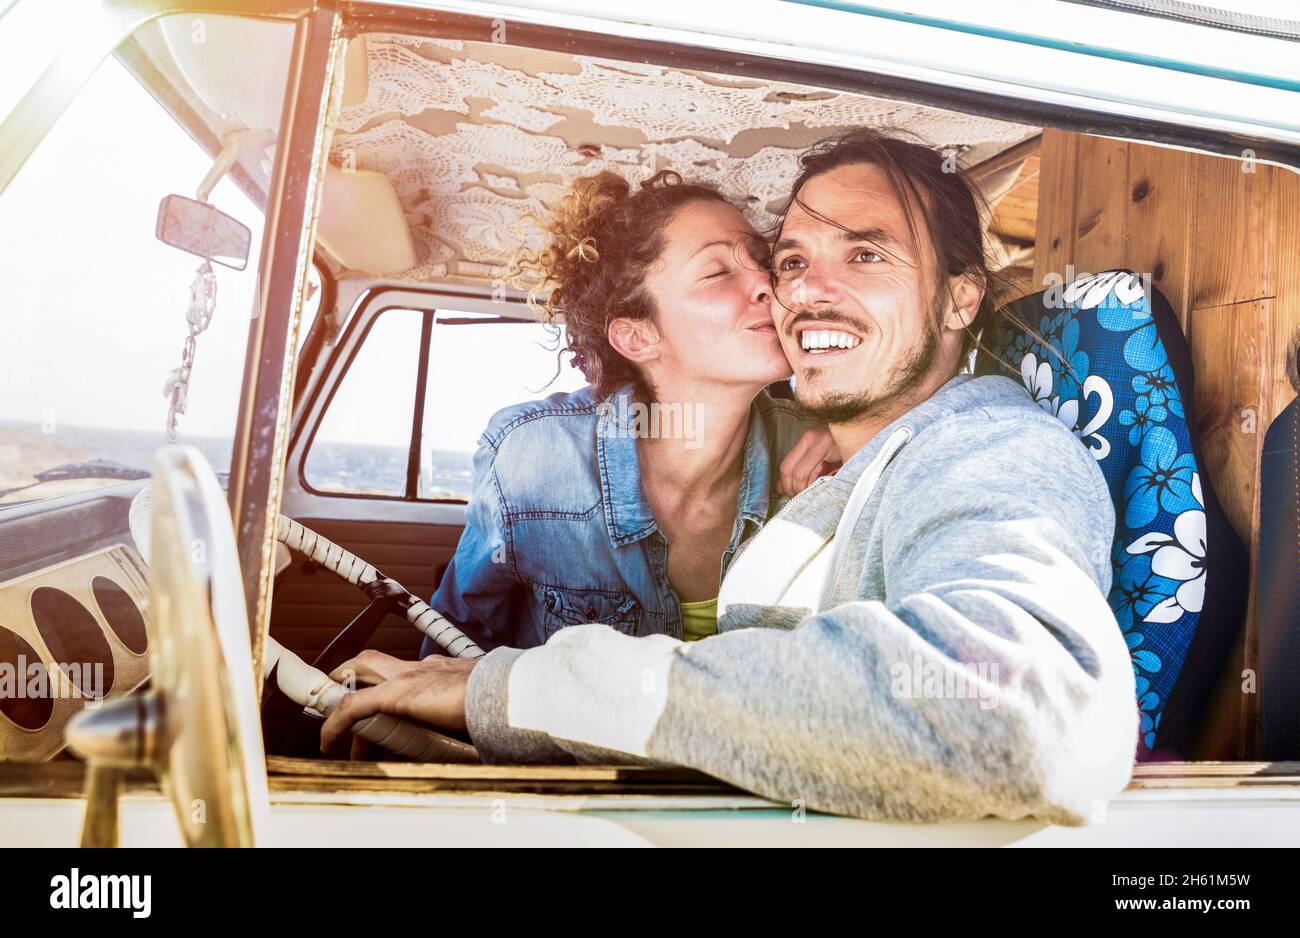 Hipster couple ready for roadtrip on oldtimer mini van transport - Travel lifetstyle concept with indie people kissing on minivan adventure trip Stock Photo